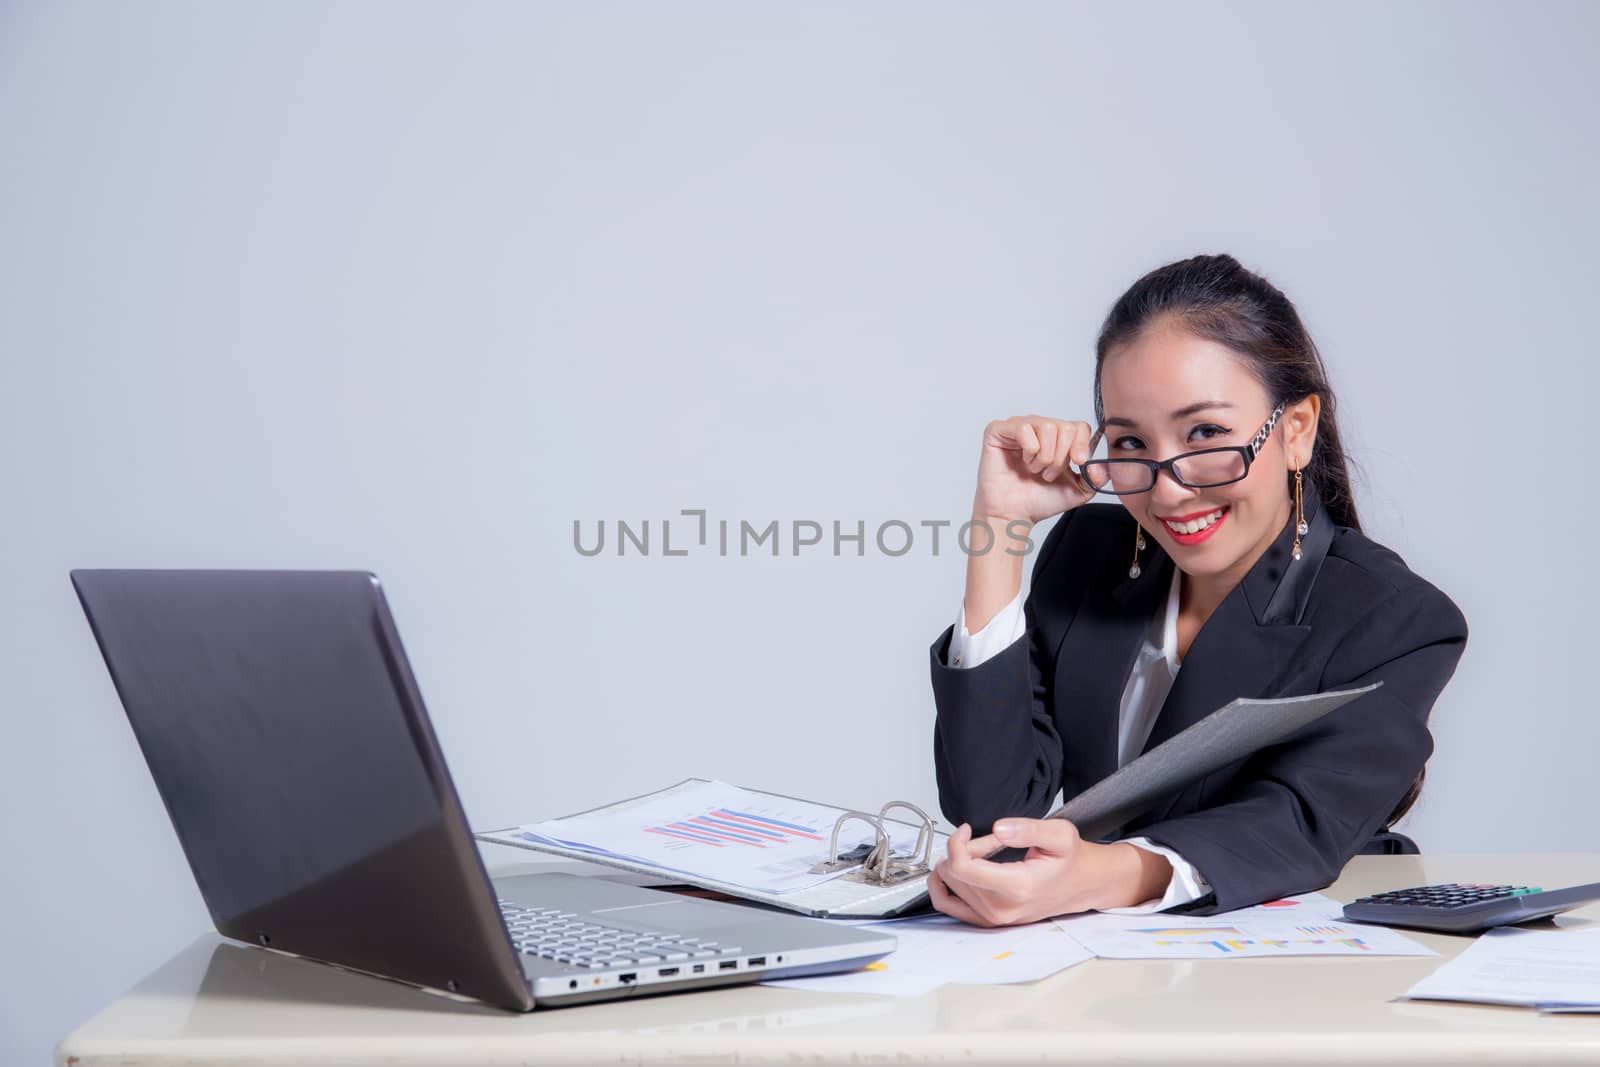 Businesswoman sitting at desk in office. He looks at the camera and smiling.